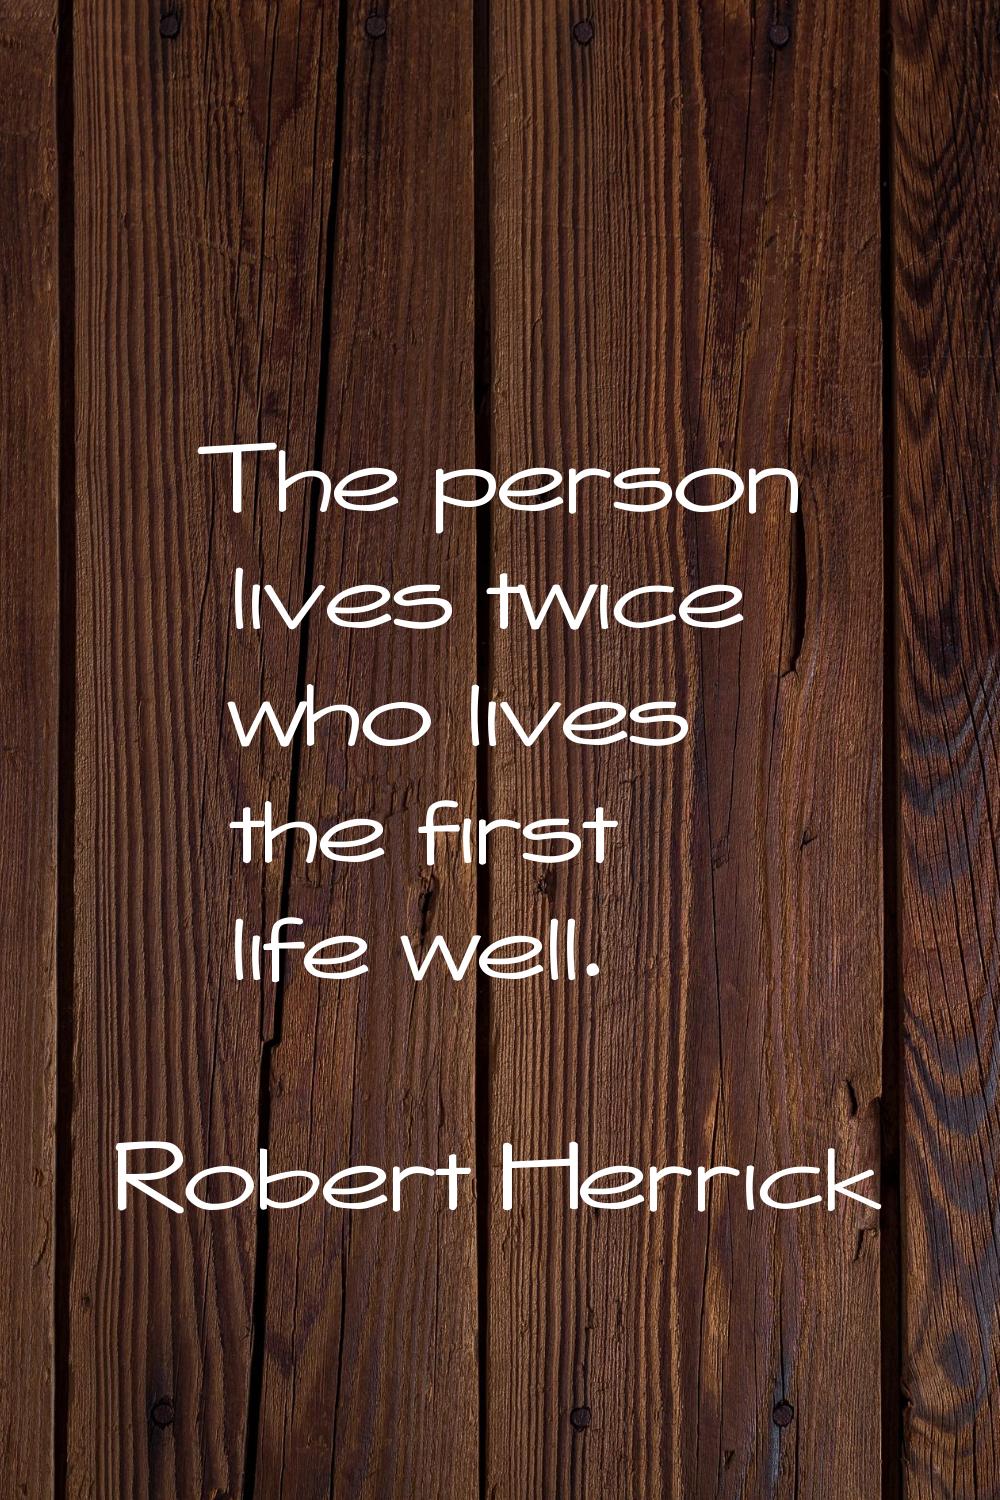 The person lives twice who lives the first life well.